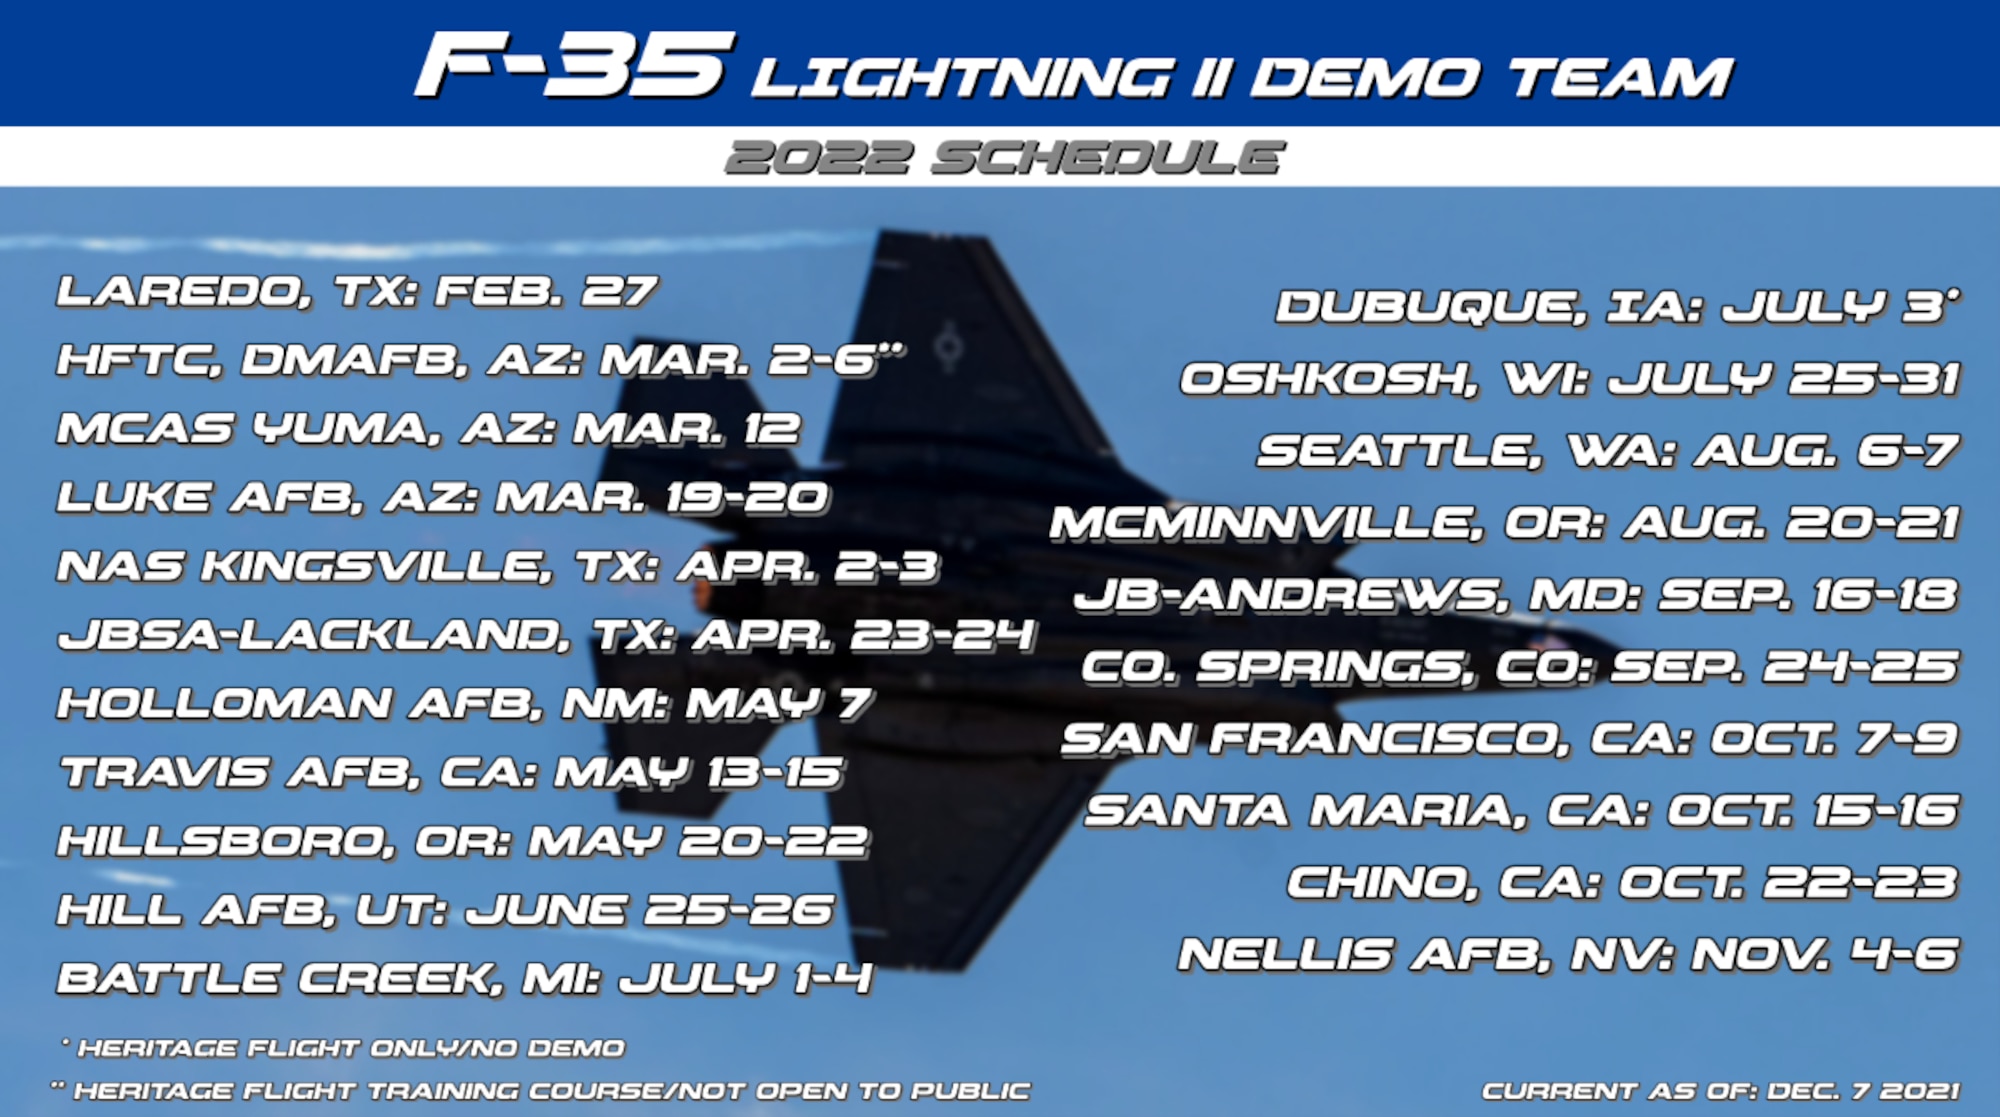 F35A Lightning II Demonstration Team schedule announced for 2022 air